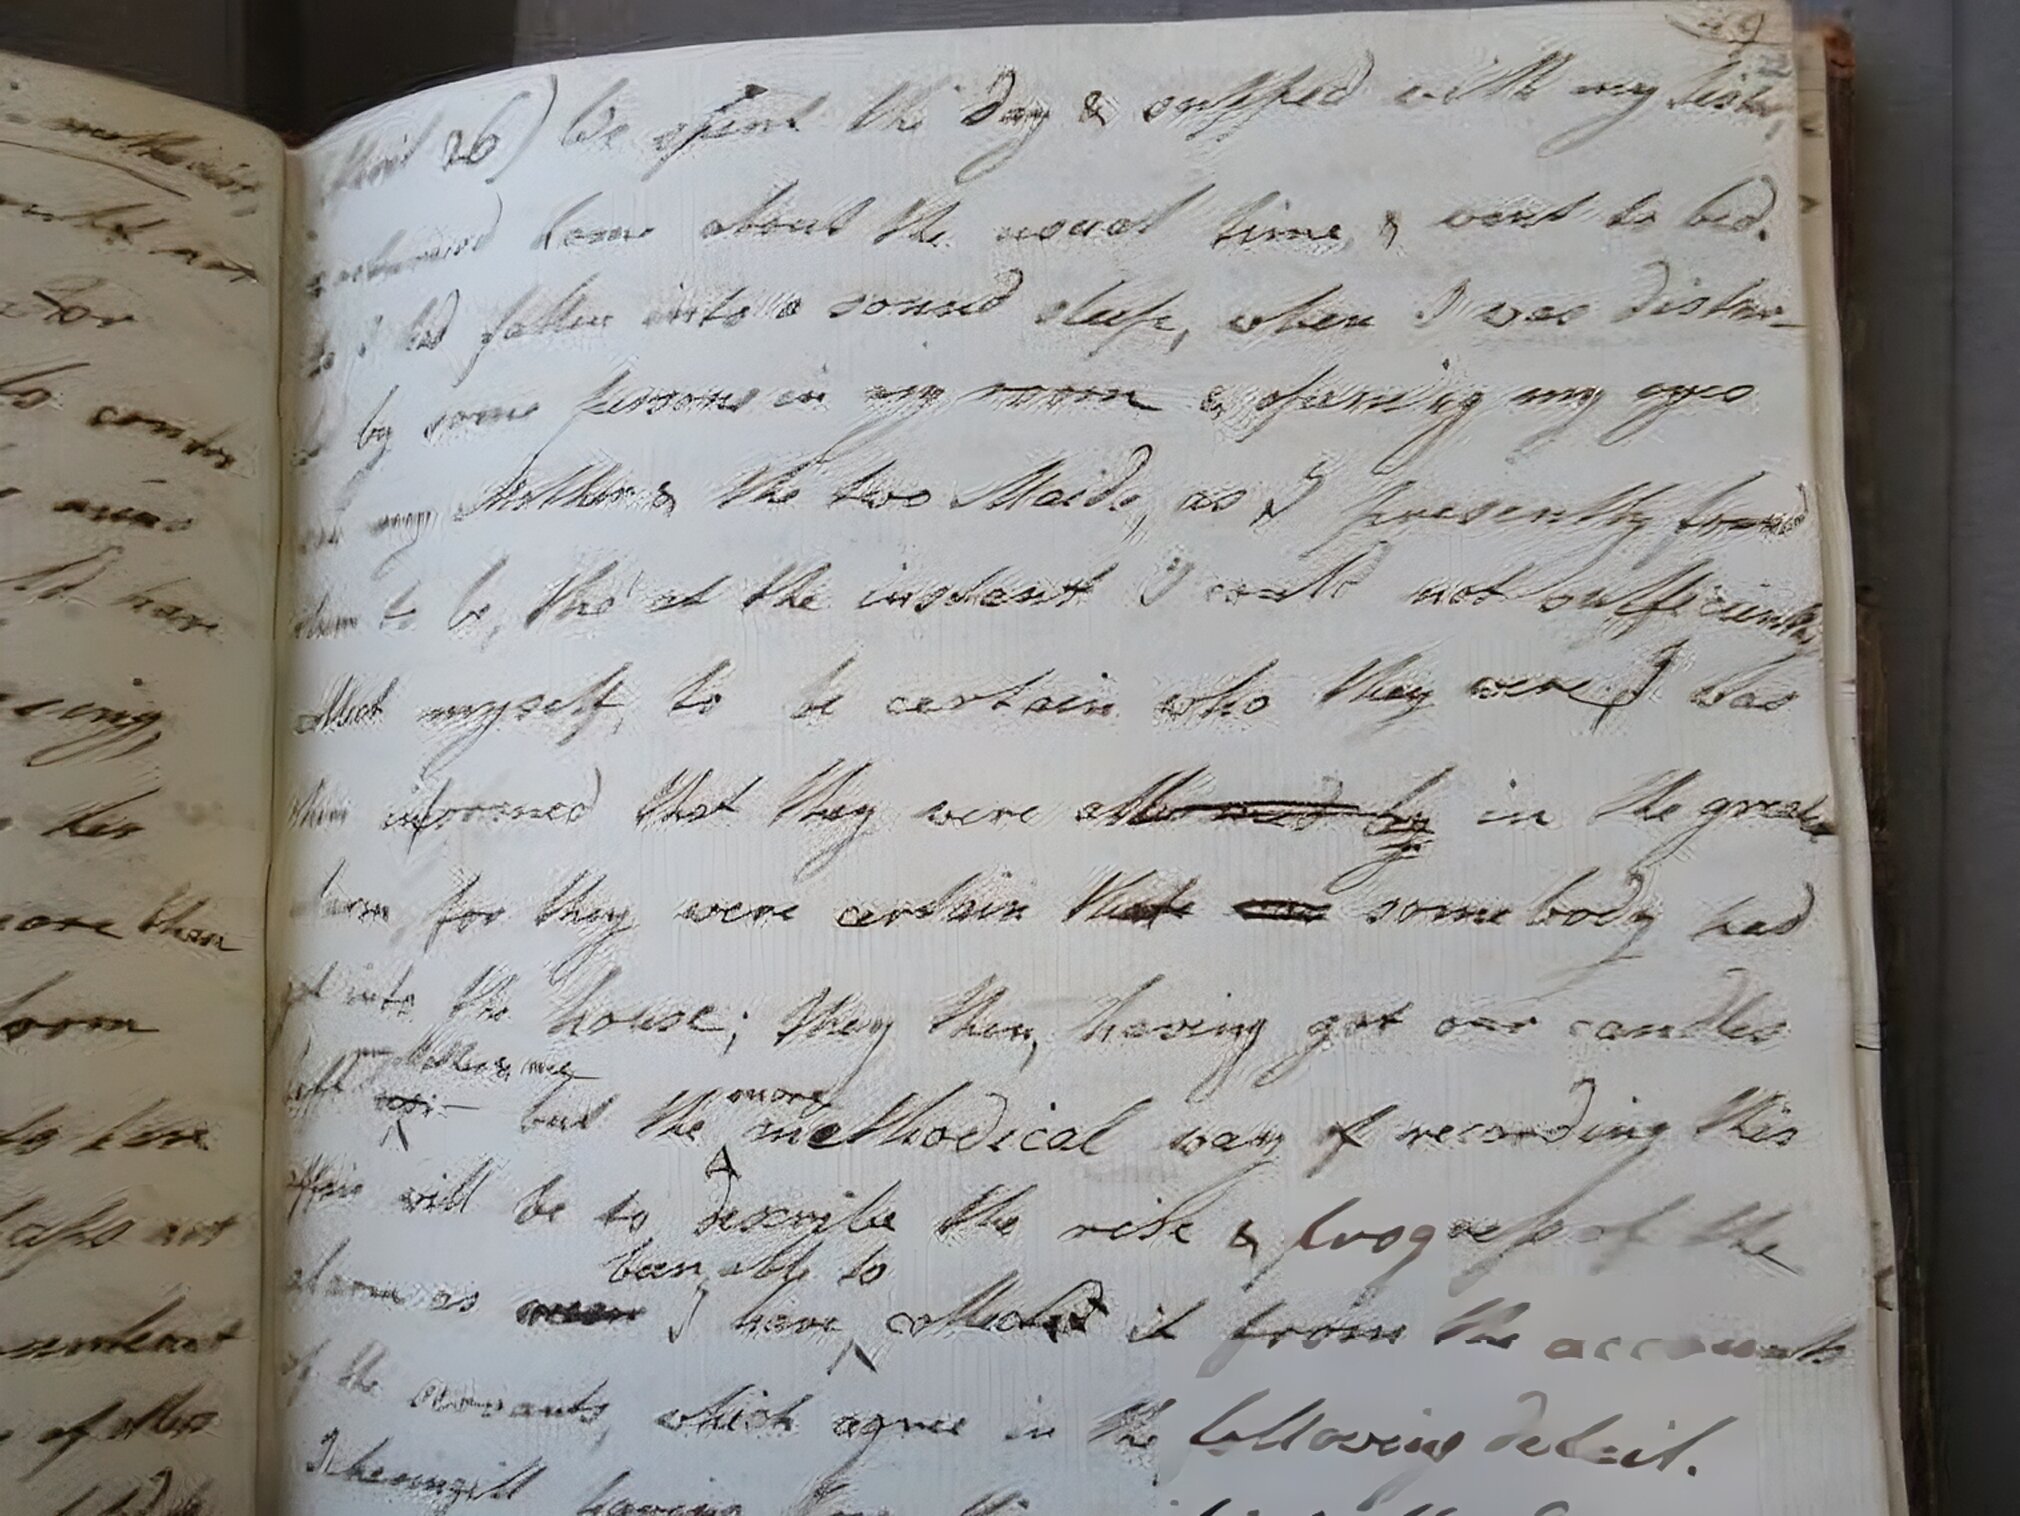 Spotlight thrown on diary of York woman from 1800s